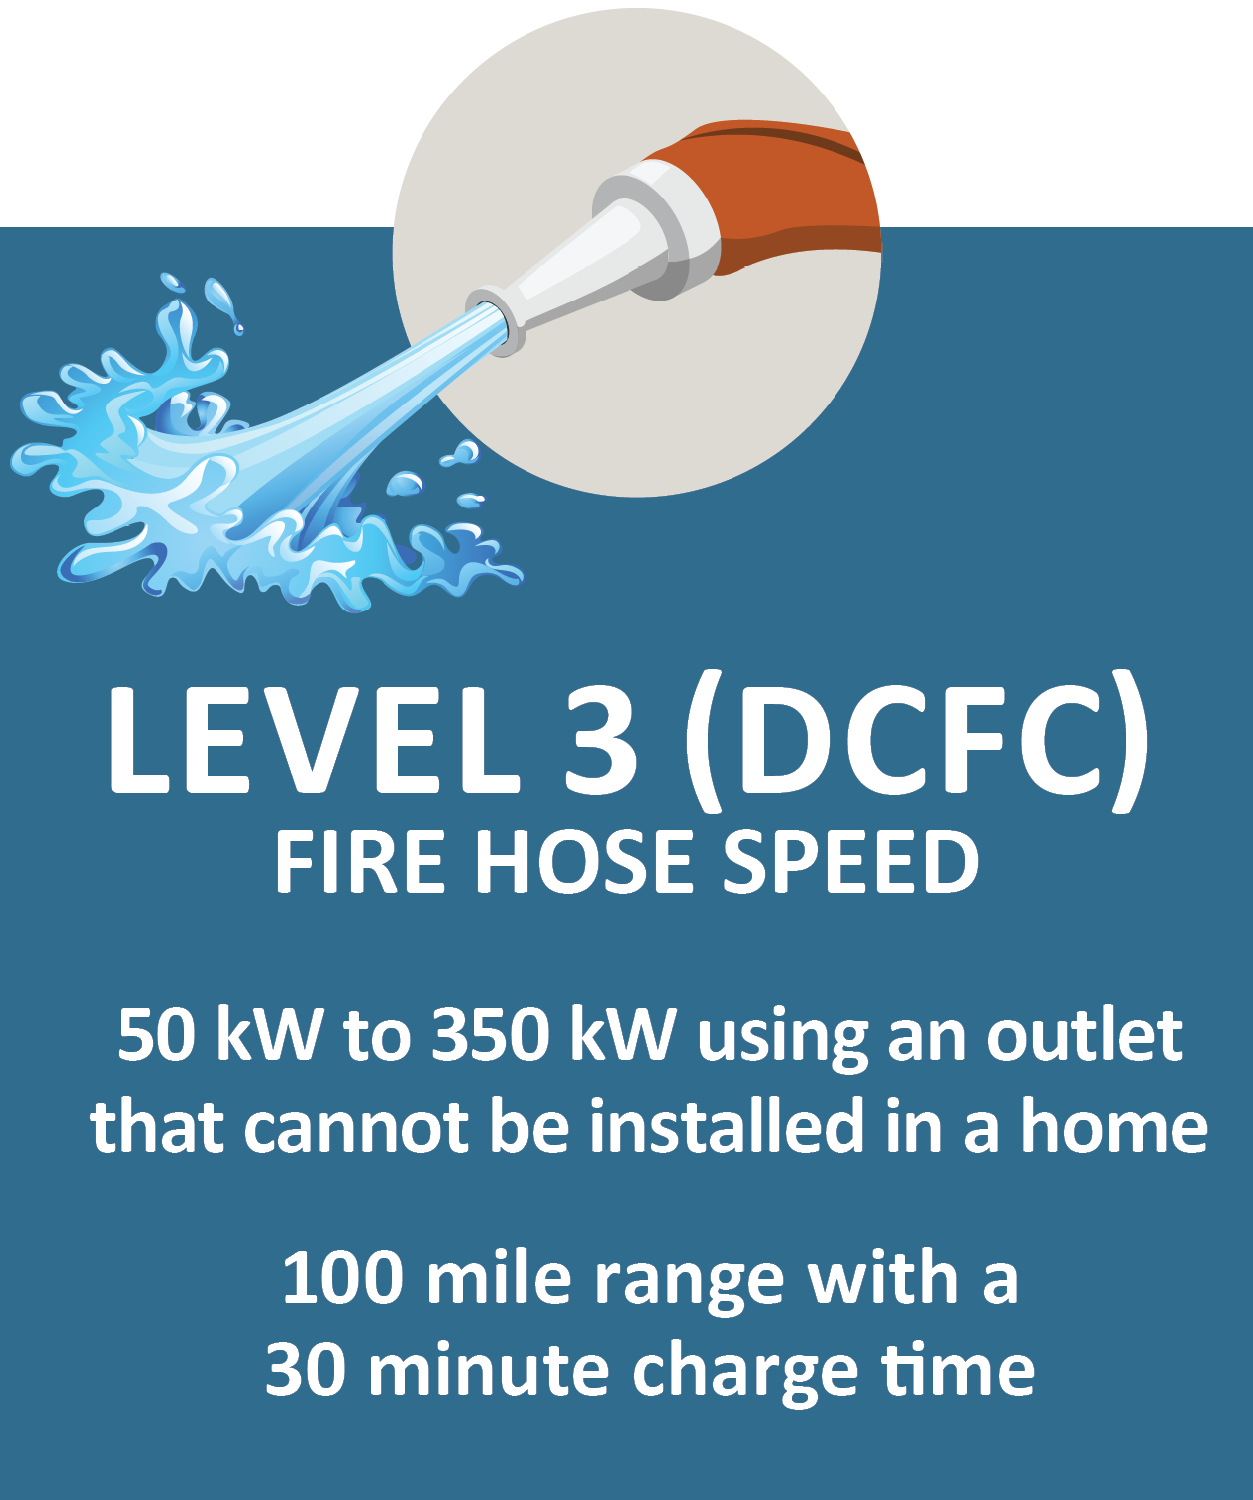 Level 3 (DCFC): Fire Hose Speed. 50 kW to 350 kW using an outlet that cannot be installed in a home 100 miles range with a 30 minute charge time.